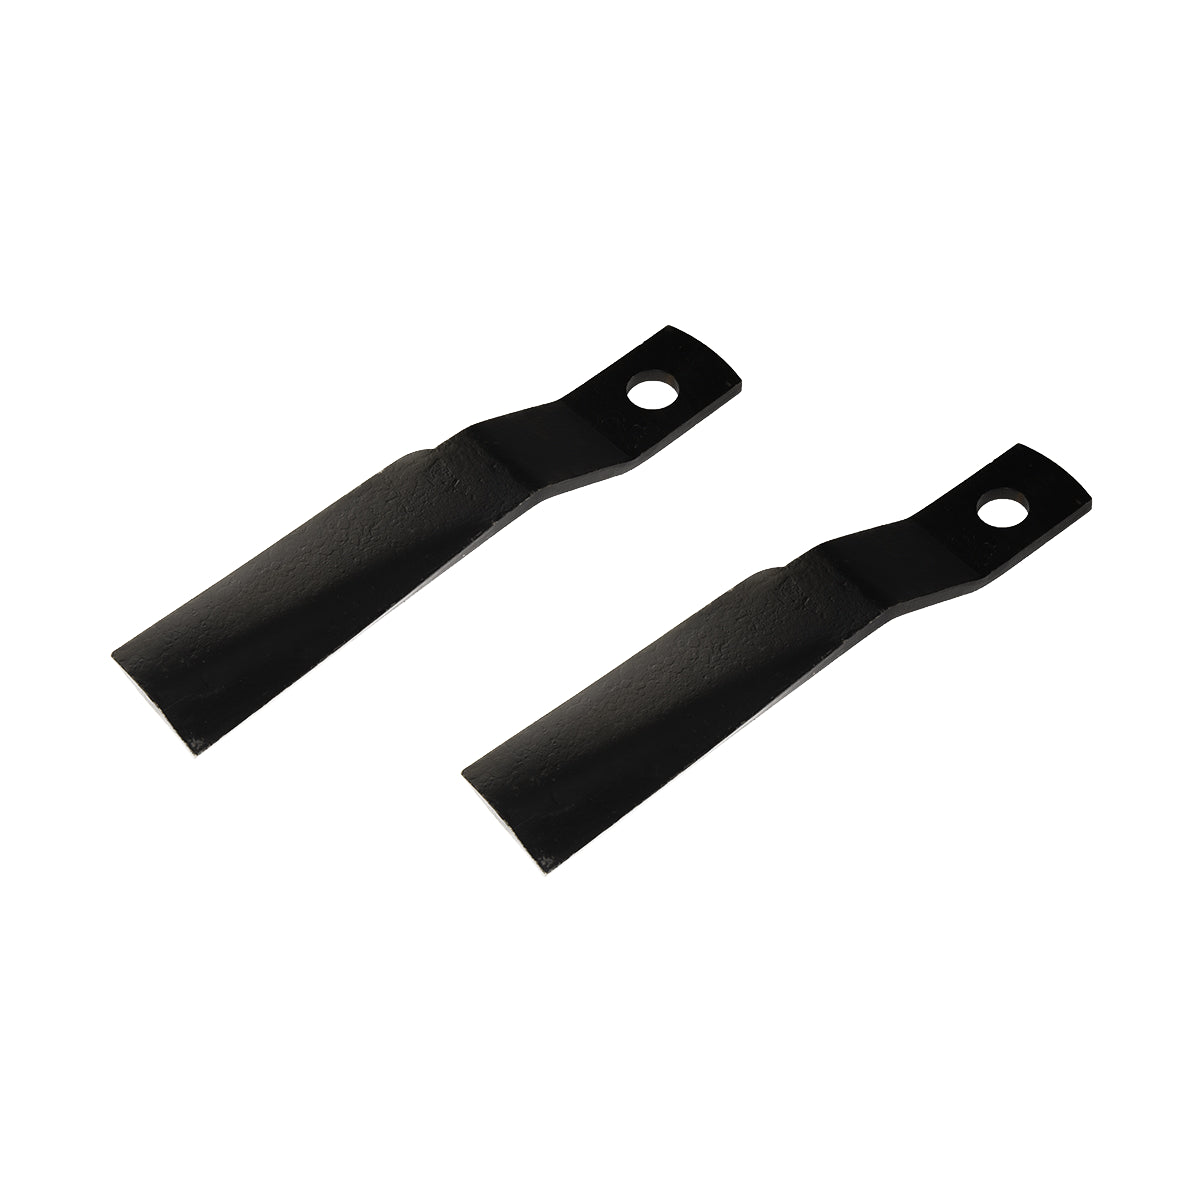 ( 1 Pack / 2 Pcs ) Blade for Extreme Duty Open Front Skid Steer Brush Cutter (SKU: 150177）